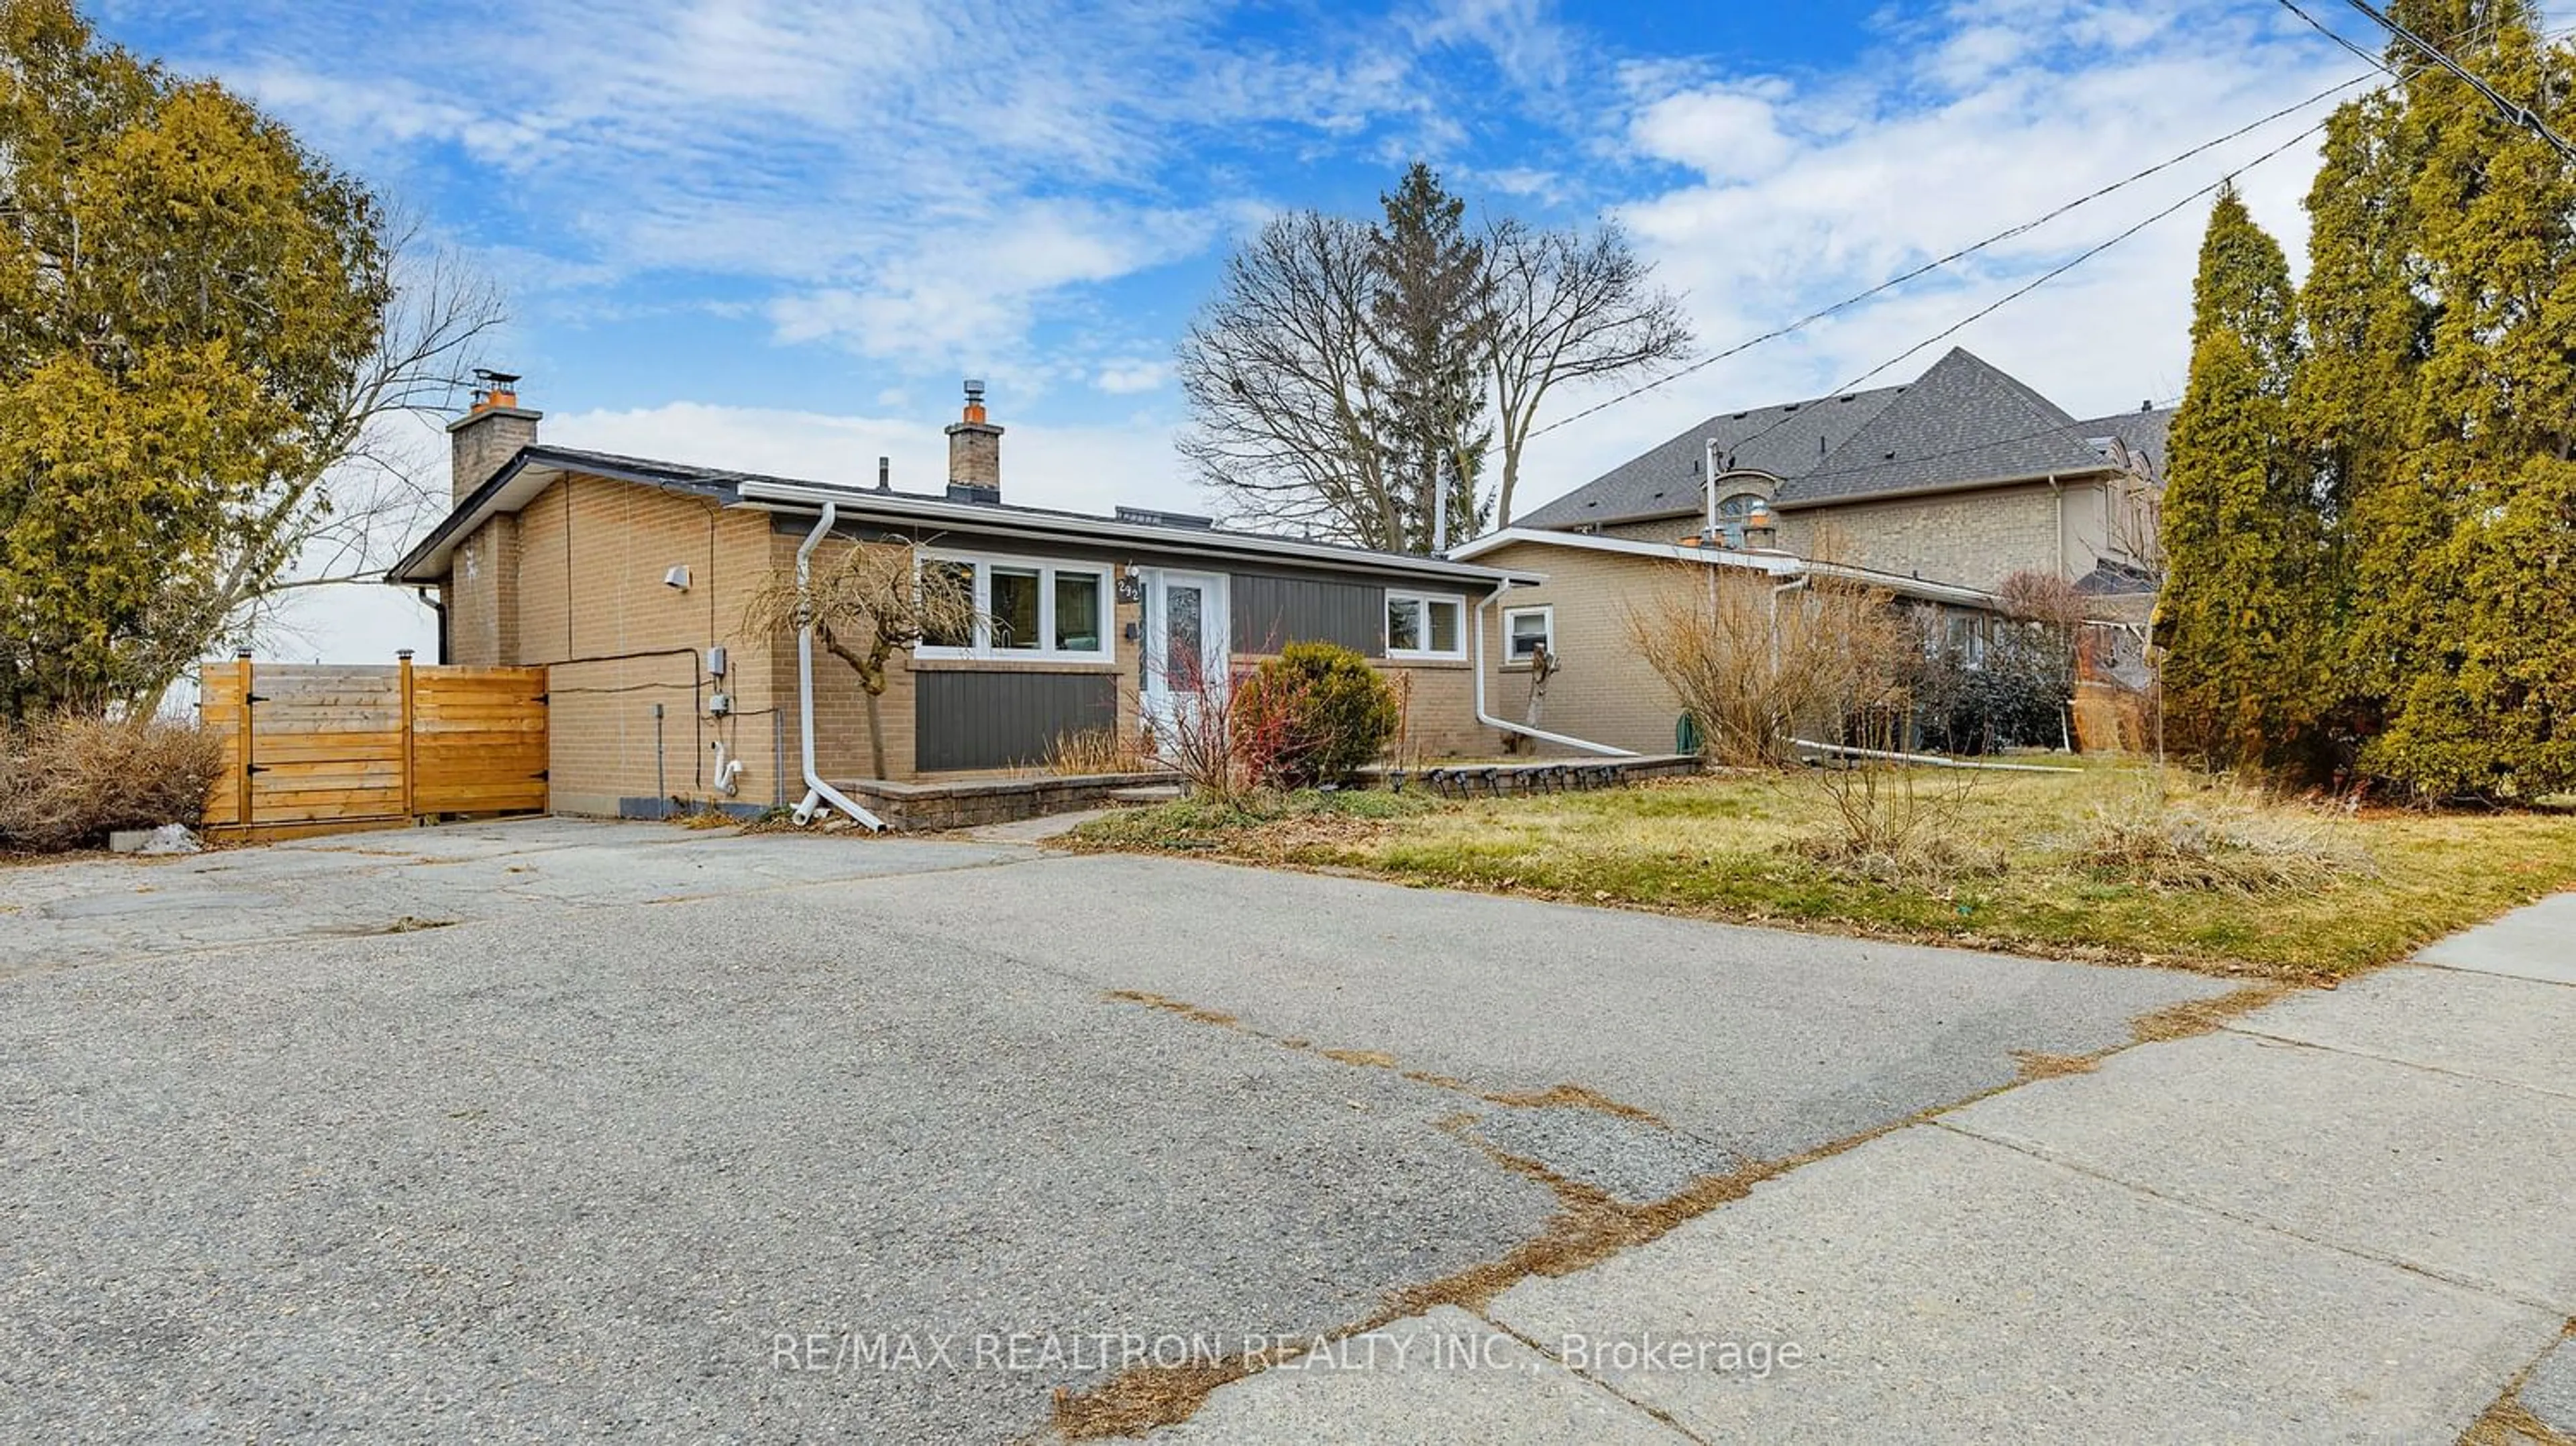 Frontside or backside of a home for 292 Essex Ave, Richmond Hill Ontario L4C 2C2